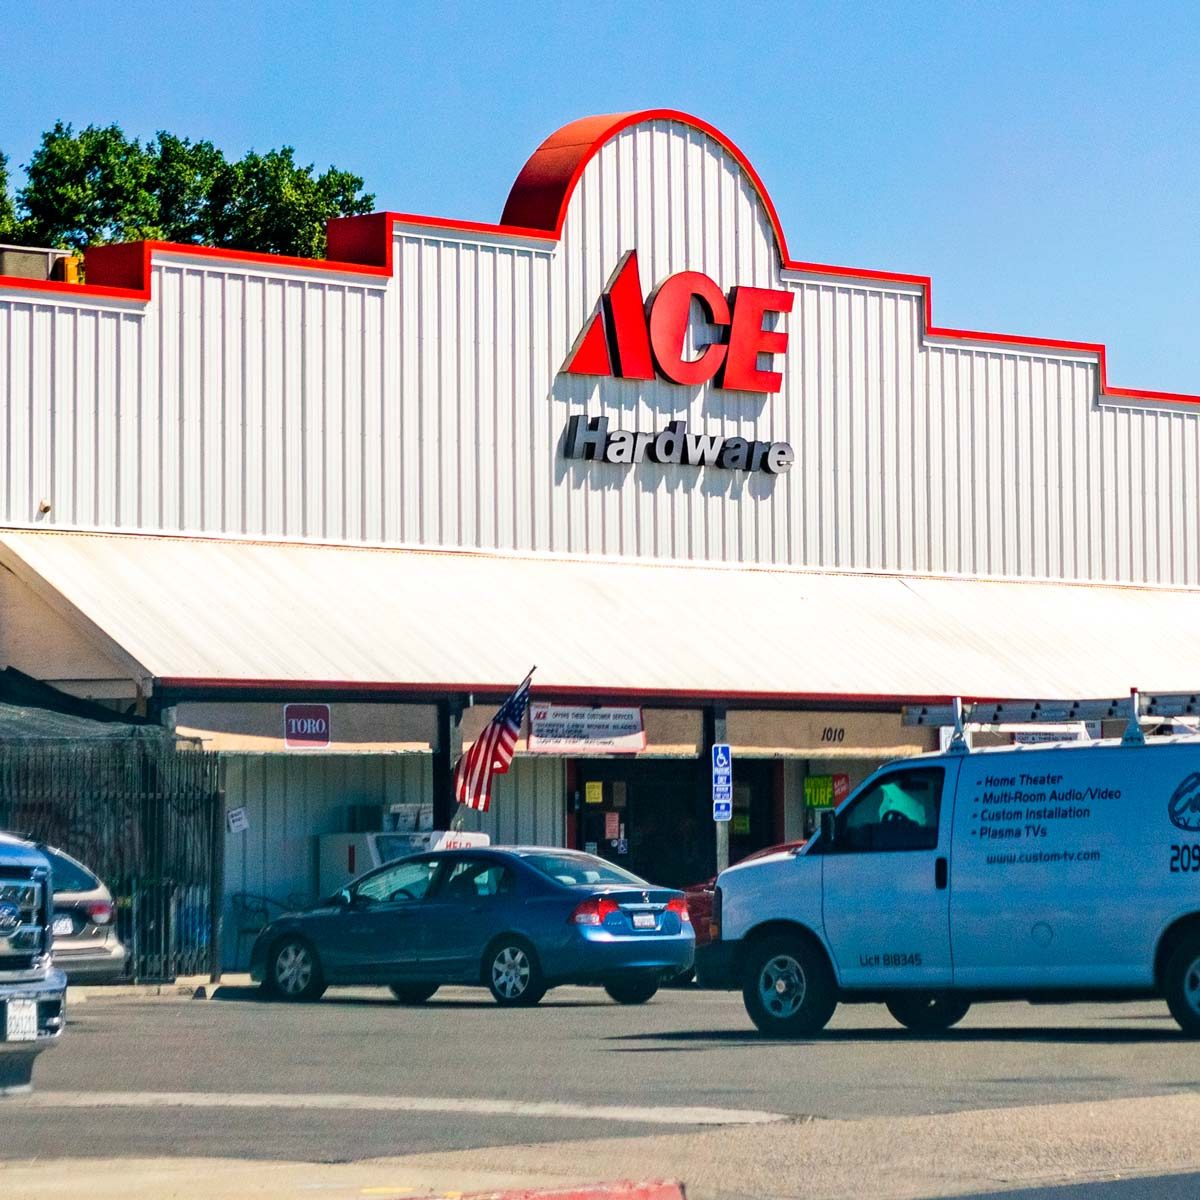 12 Things Ace Hardware Employees Won't Tell You